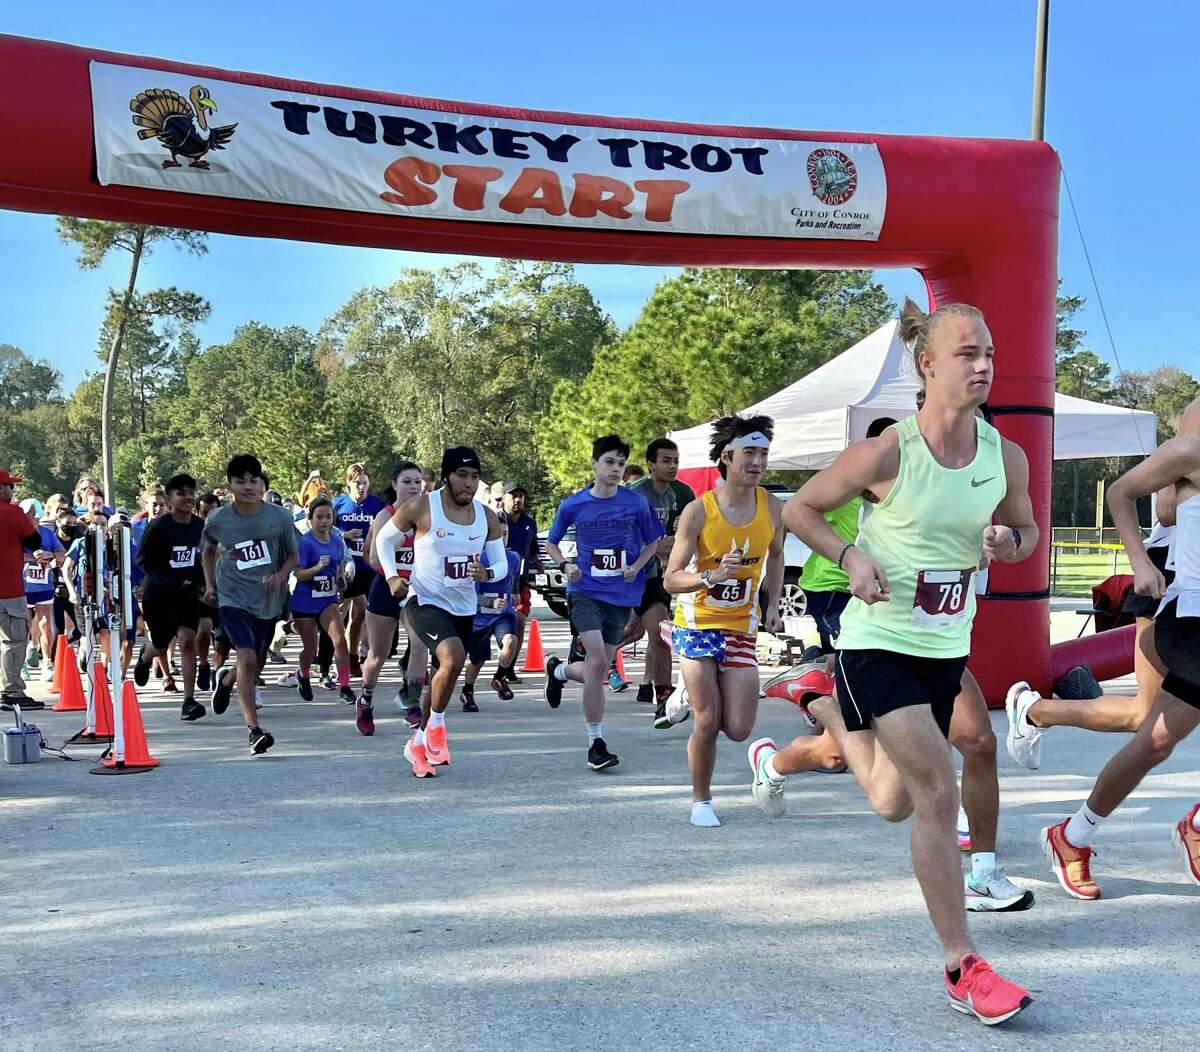 A turkey trot training class will prepare you for the Turkey Trot 5K by discussing training plans, proper warmup, routines, answer questions, review nutrition and provide support. Participants in this class will receive $10 off their Conroe Turkey Trot registration. Fee is $30 for residents and $37 for non-residents. You can register online at cityofconroe.org or call the Recreation center at 936-522-3900.